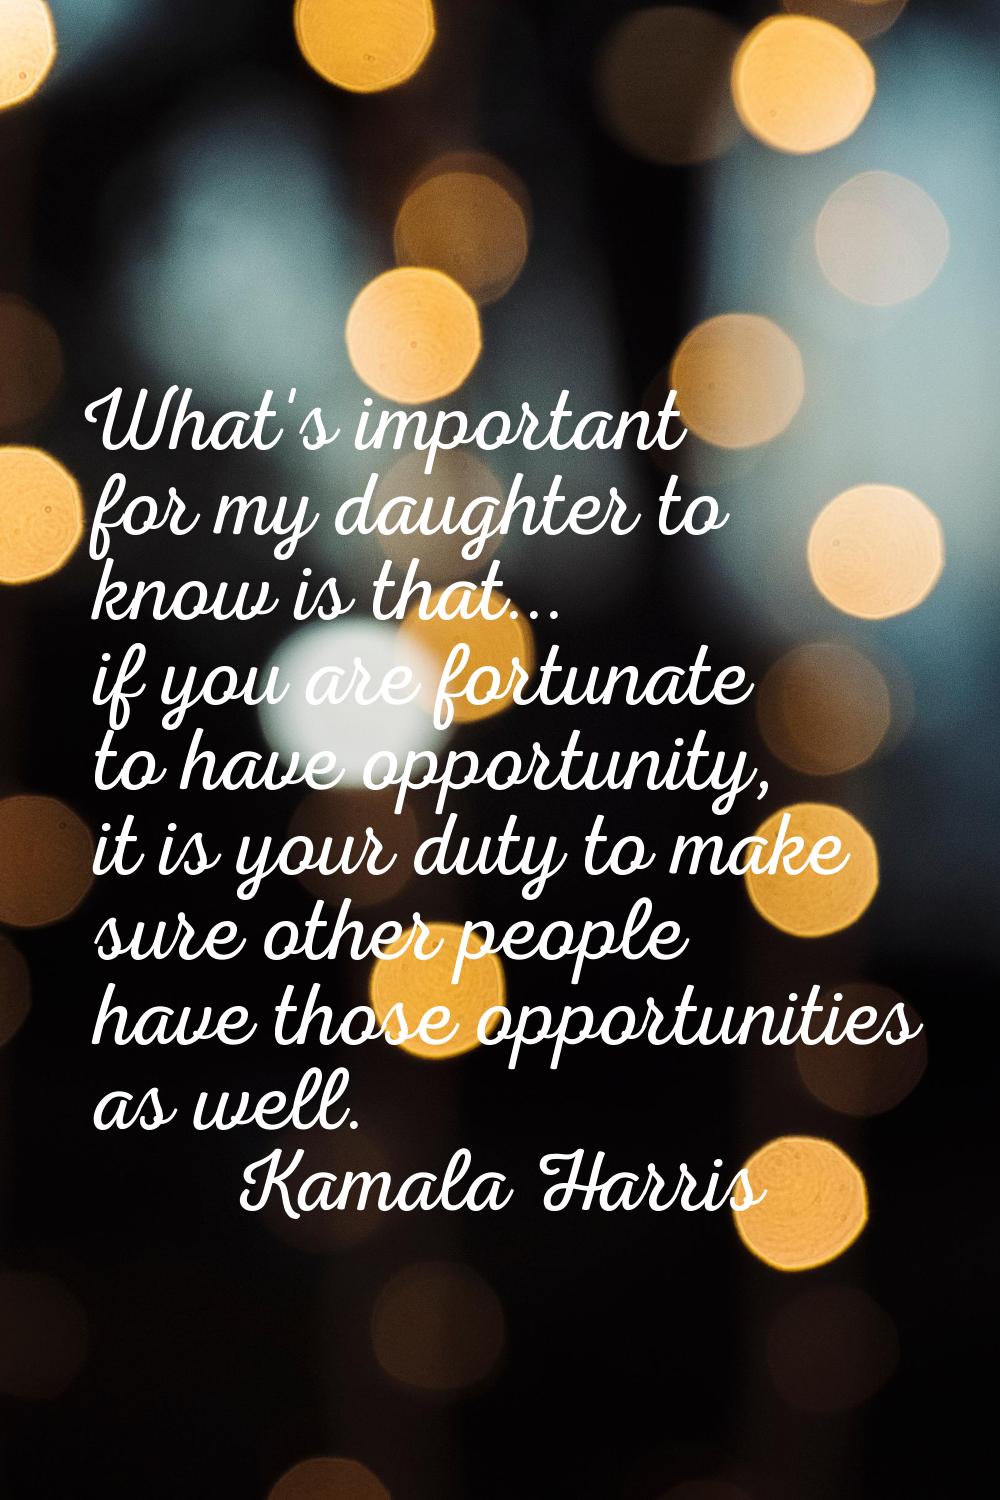 What's important for my daughter to know is that... if you are fortunate to have opportunity, it is